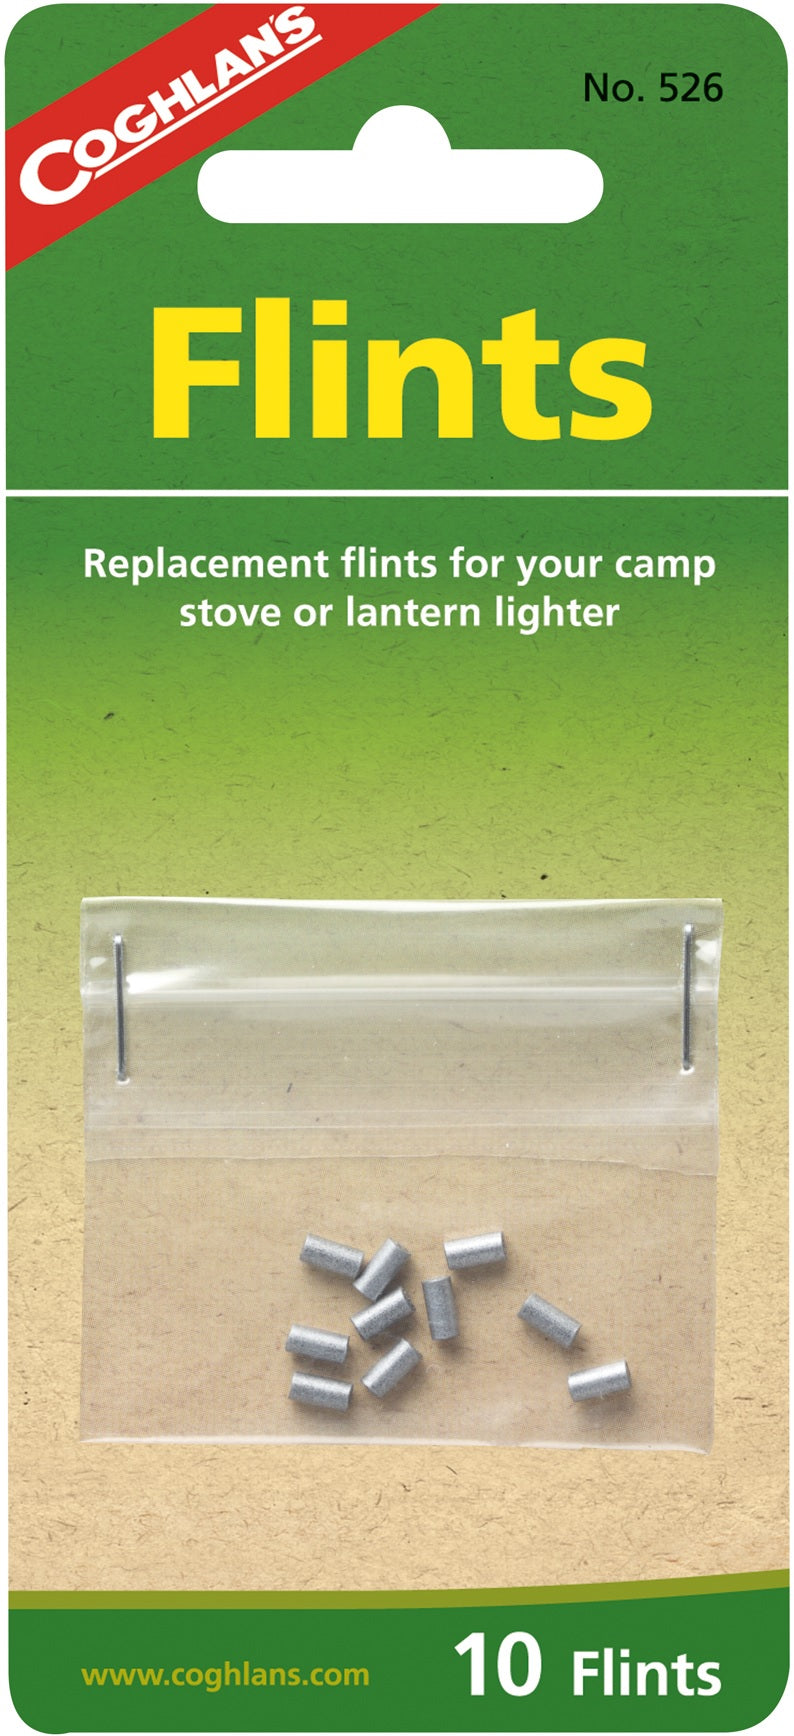 buy lighting & lanterns accessories at cheap rate in bulk. wholesale & retail camping products & supplies store.